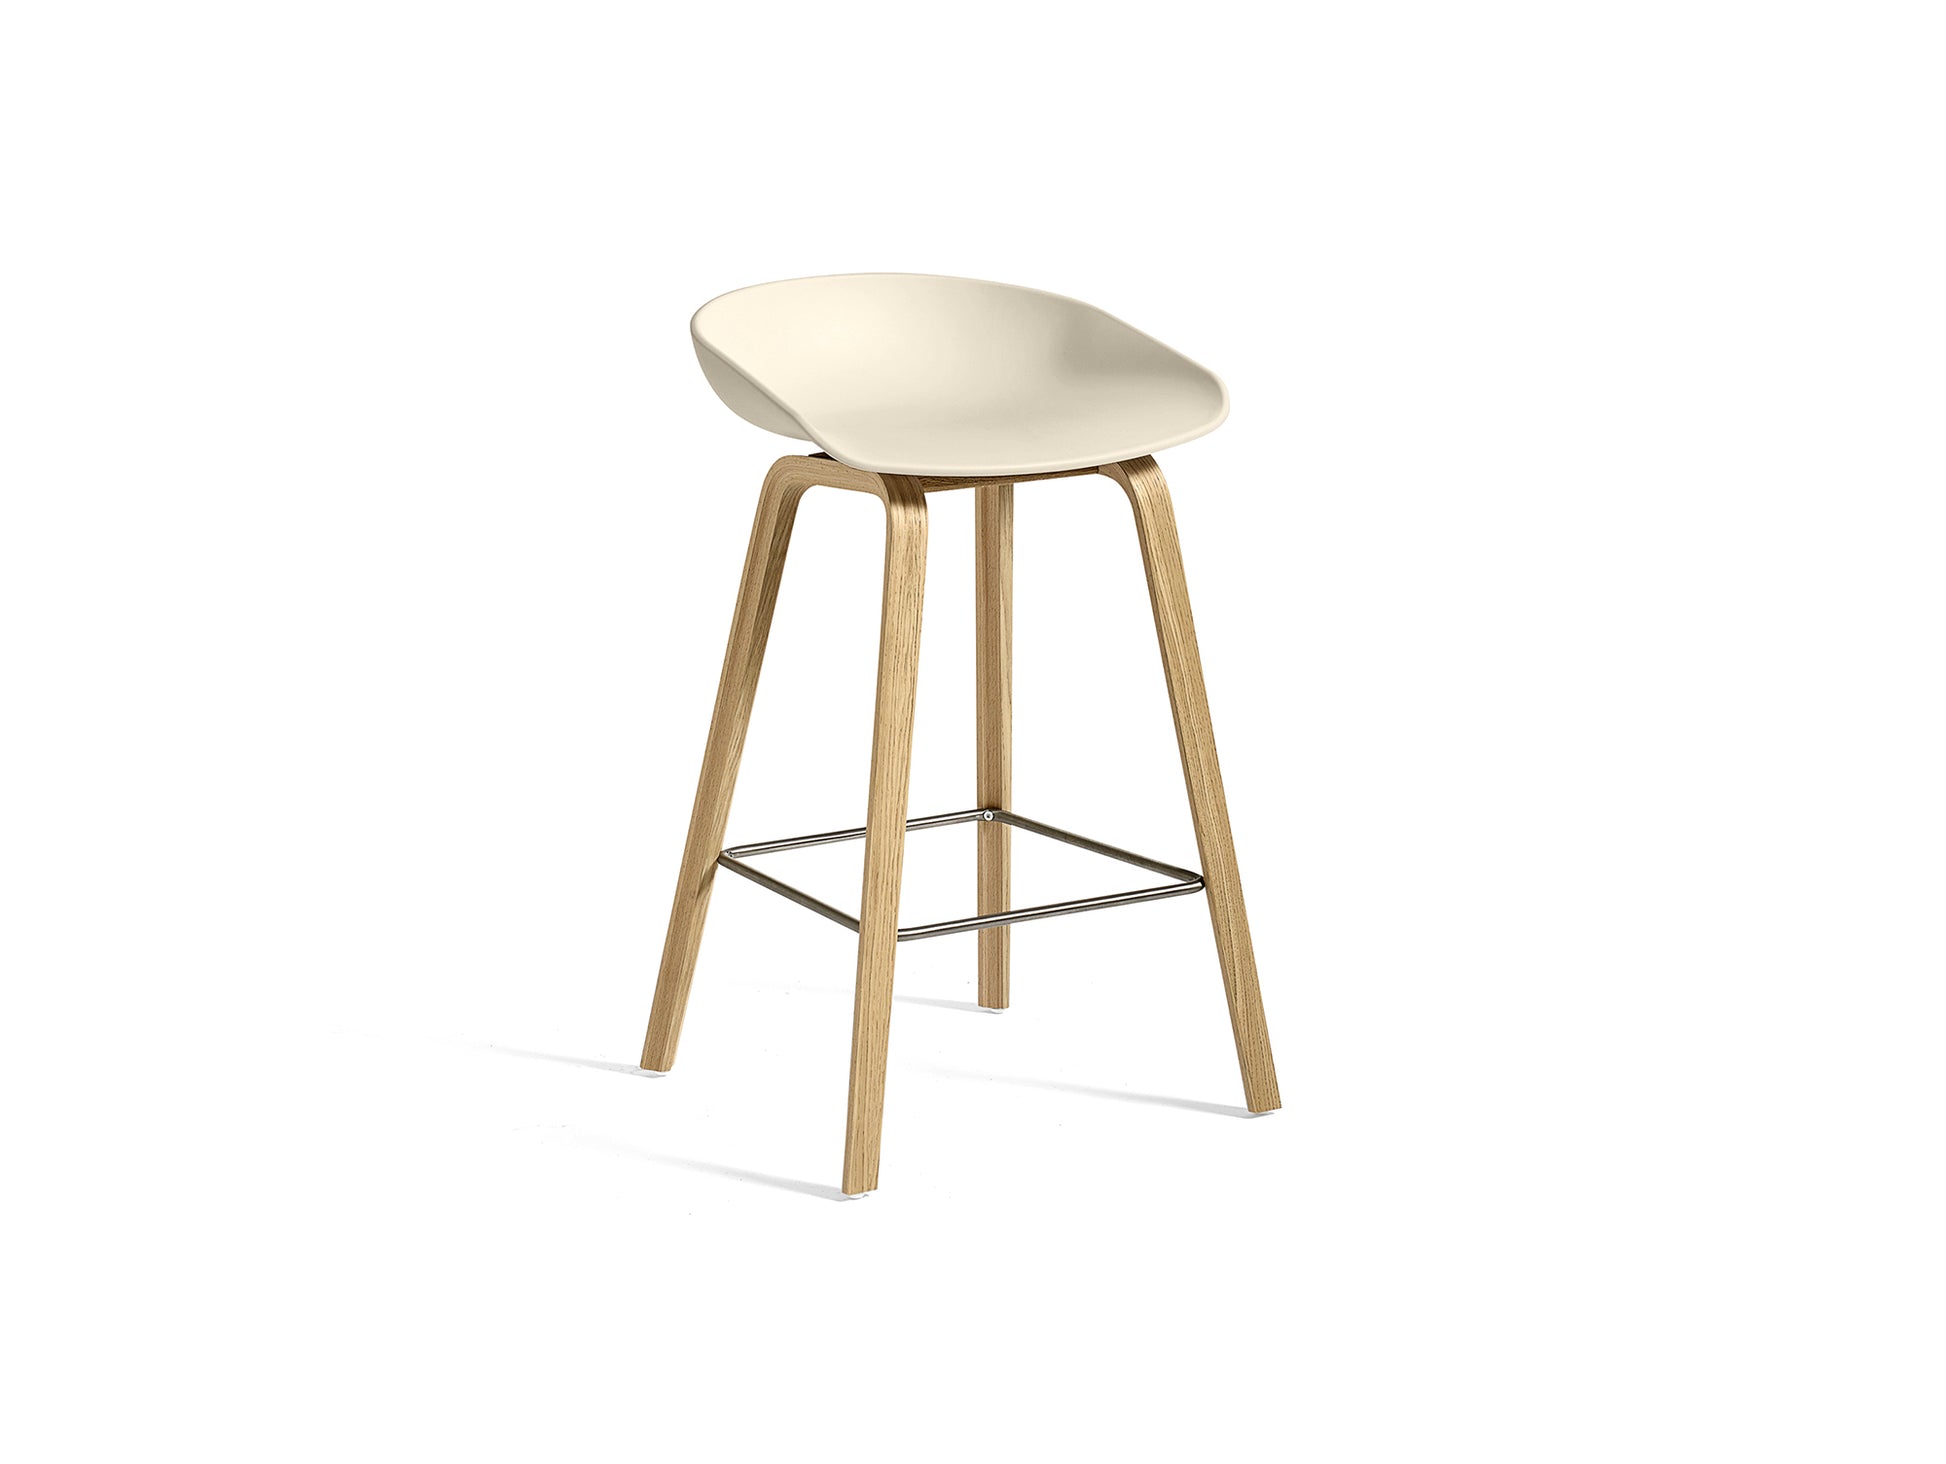 About A Stool AAS 32 by HAY - H 65cm / Melange Cream Shell / Lacquered Oak Base